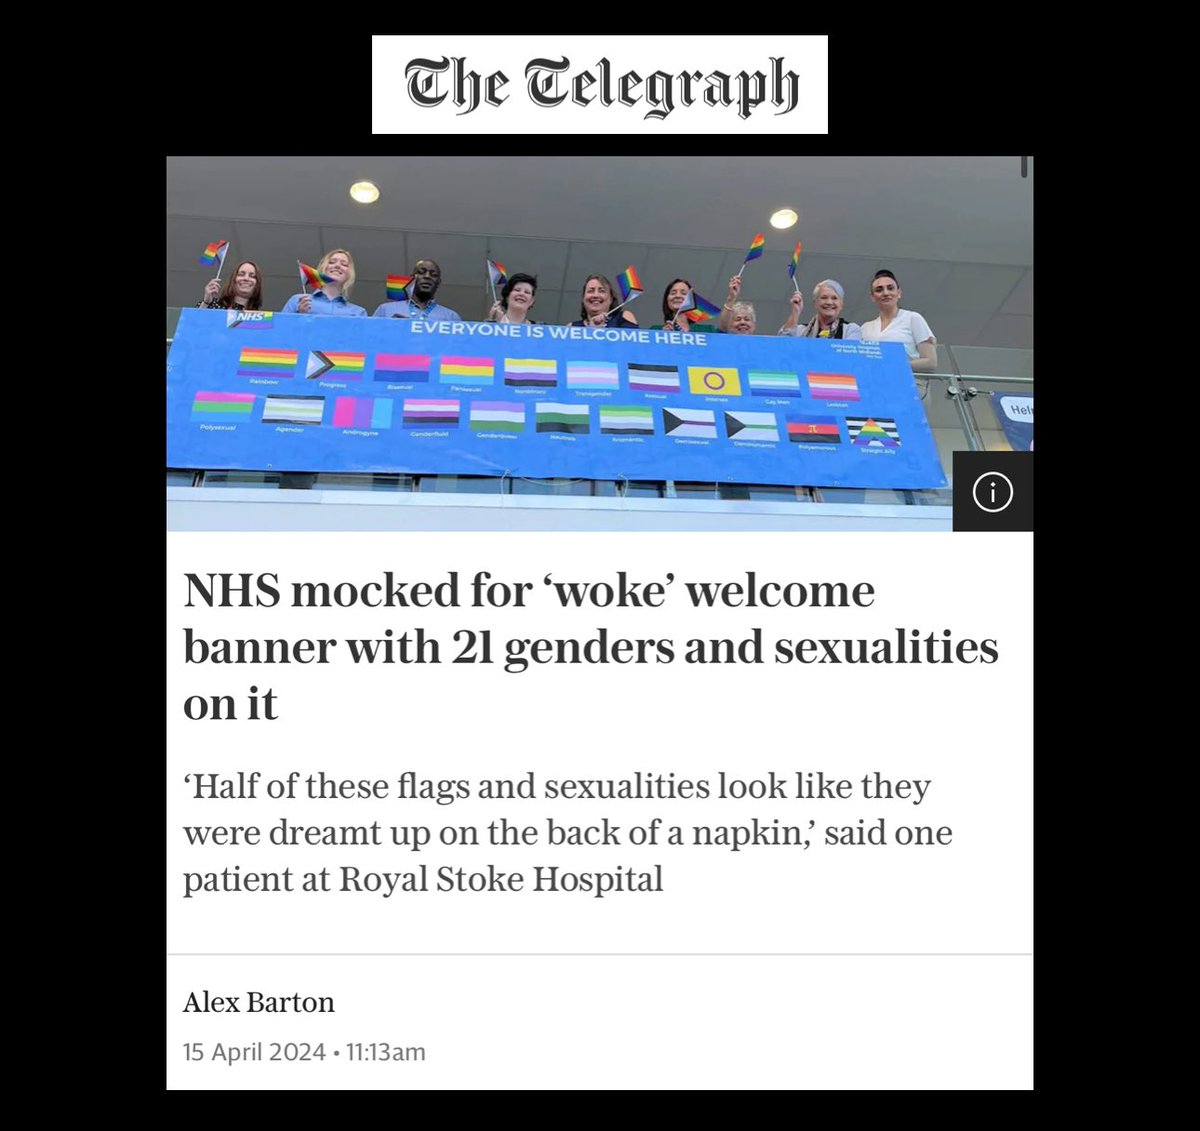 Dear @Telegraph,

Nearly 10 million people are on the longest waiting list in NHS history, 500 deaths occur every single week from delays accessing NHS emergency care, but this is newsworthy? Everyone should feel welcome in the NHS. Everyone. Stop feeding hatred.

#SOSNHS